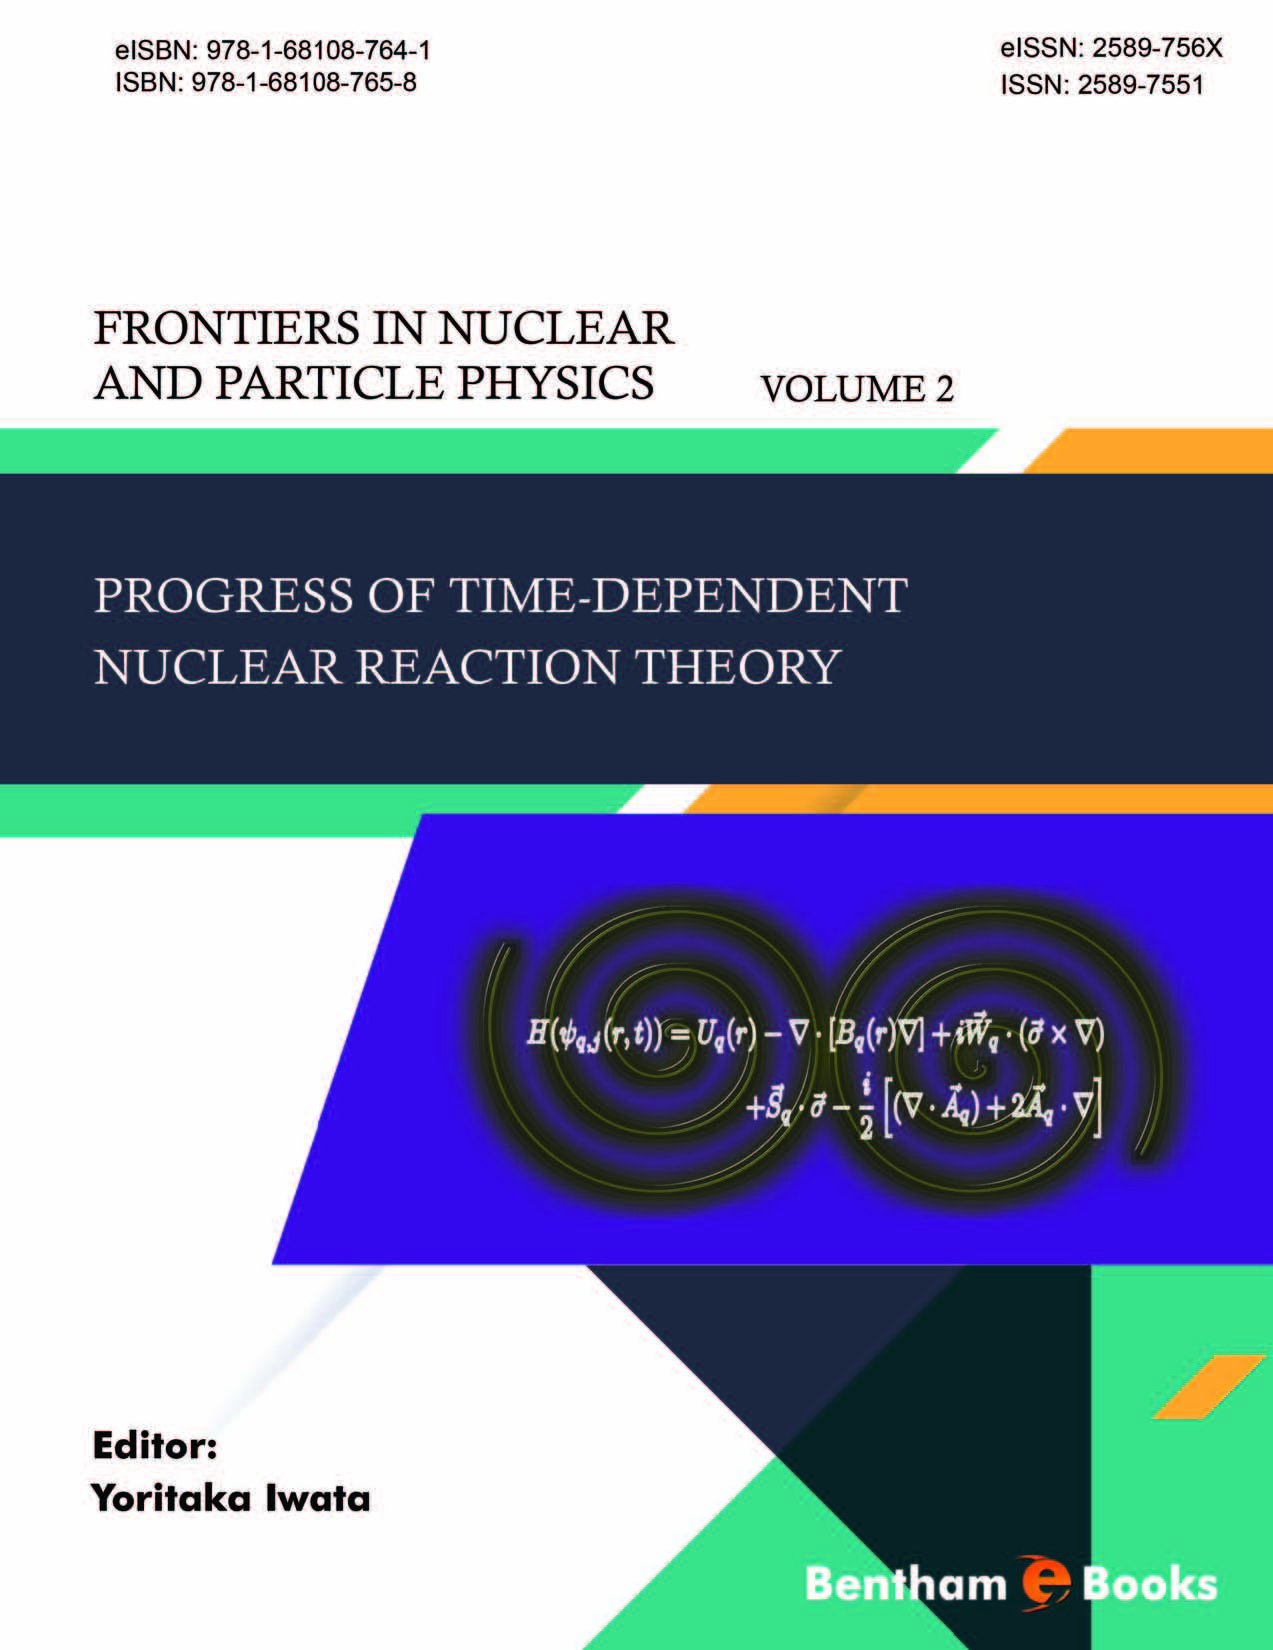 Progress of Time-Dependent Nuclear Reaction Theory